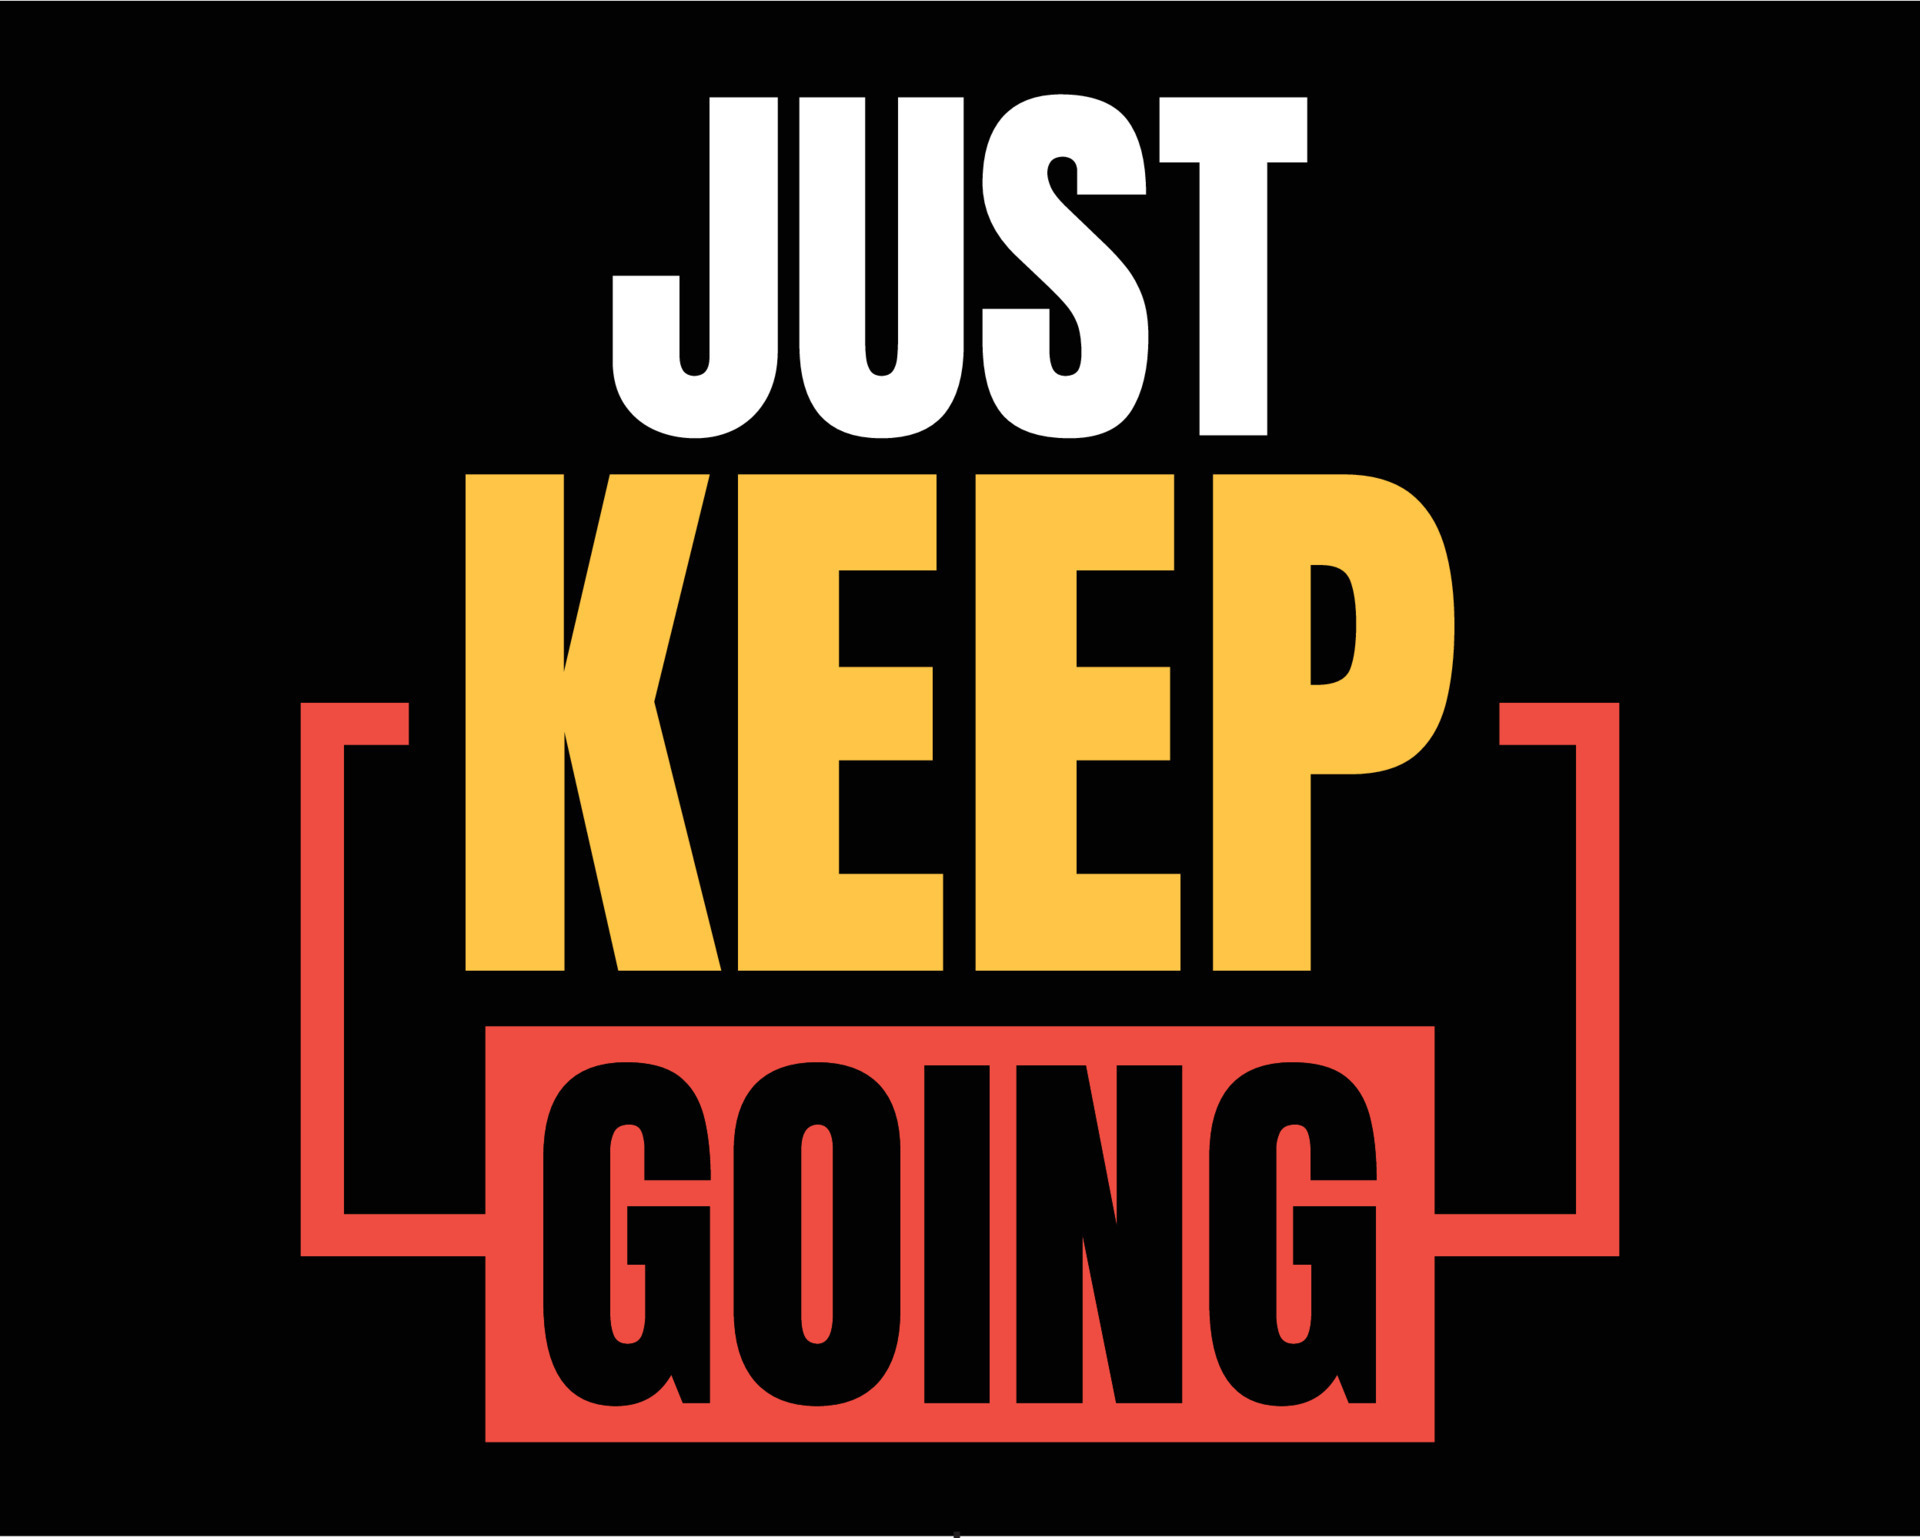 Just keep going typography lettering tshirt design. Motivational quotes ...